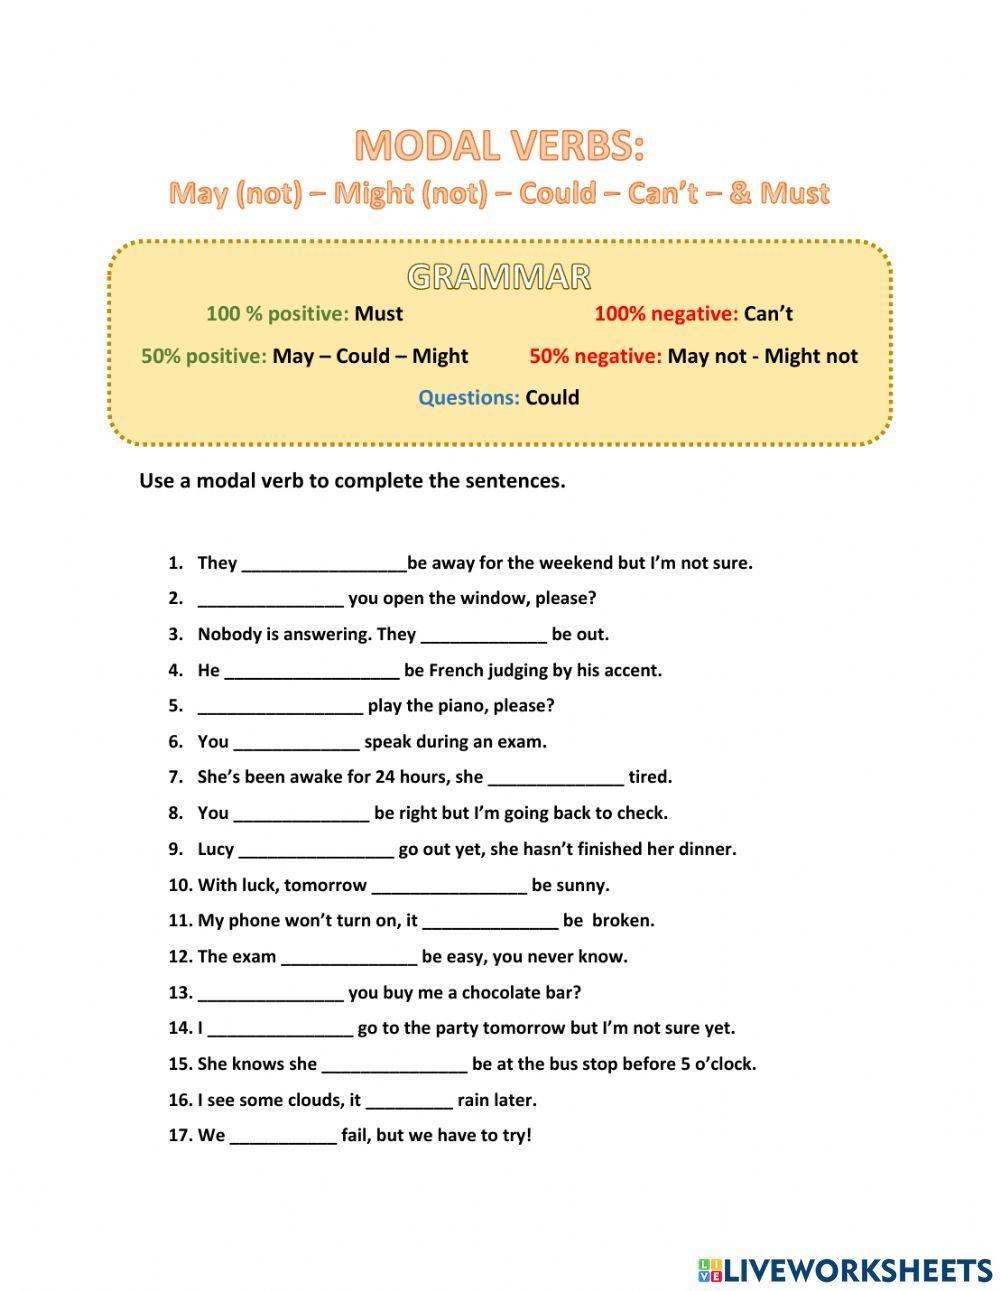 Modal Verbs (Must, can't, may, might, could) worksheet